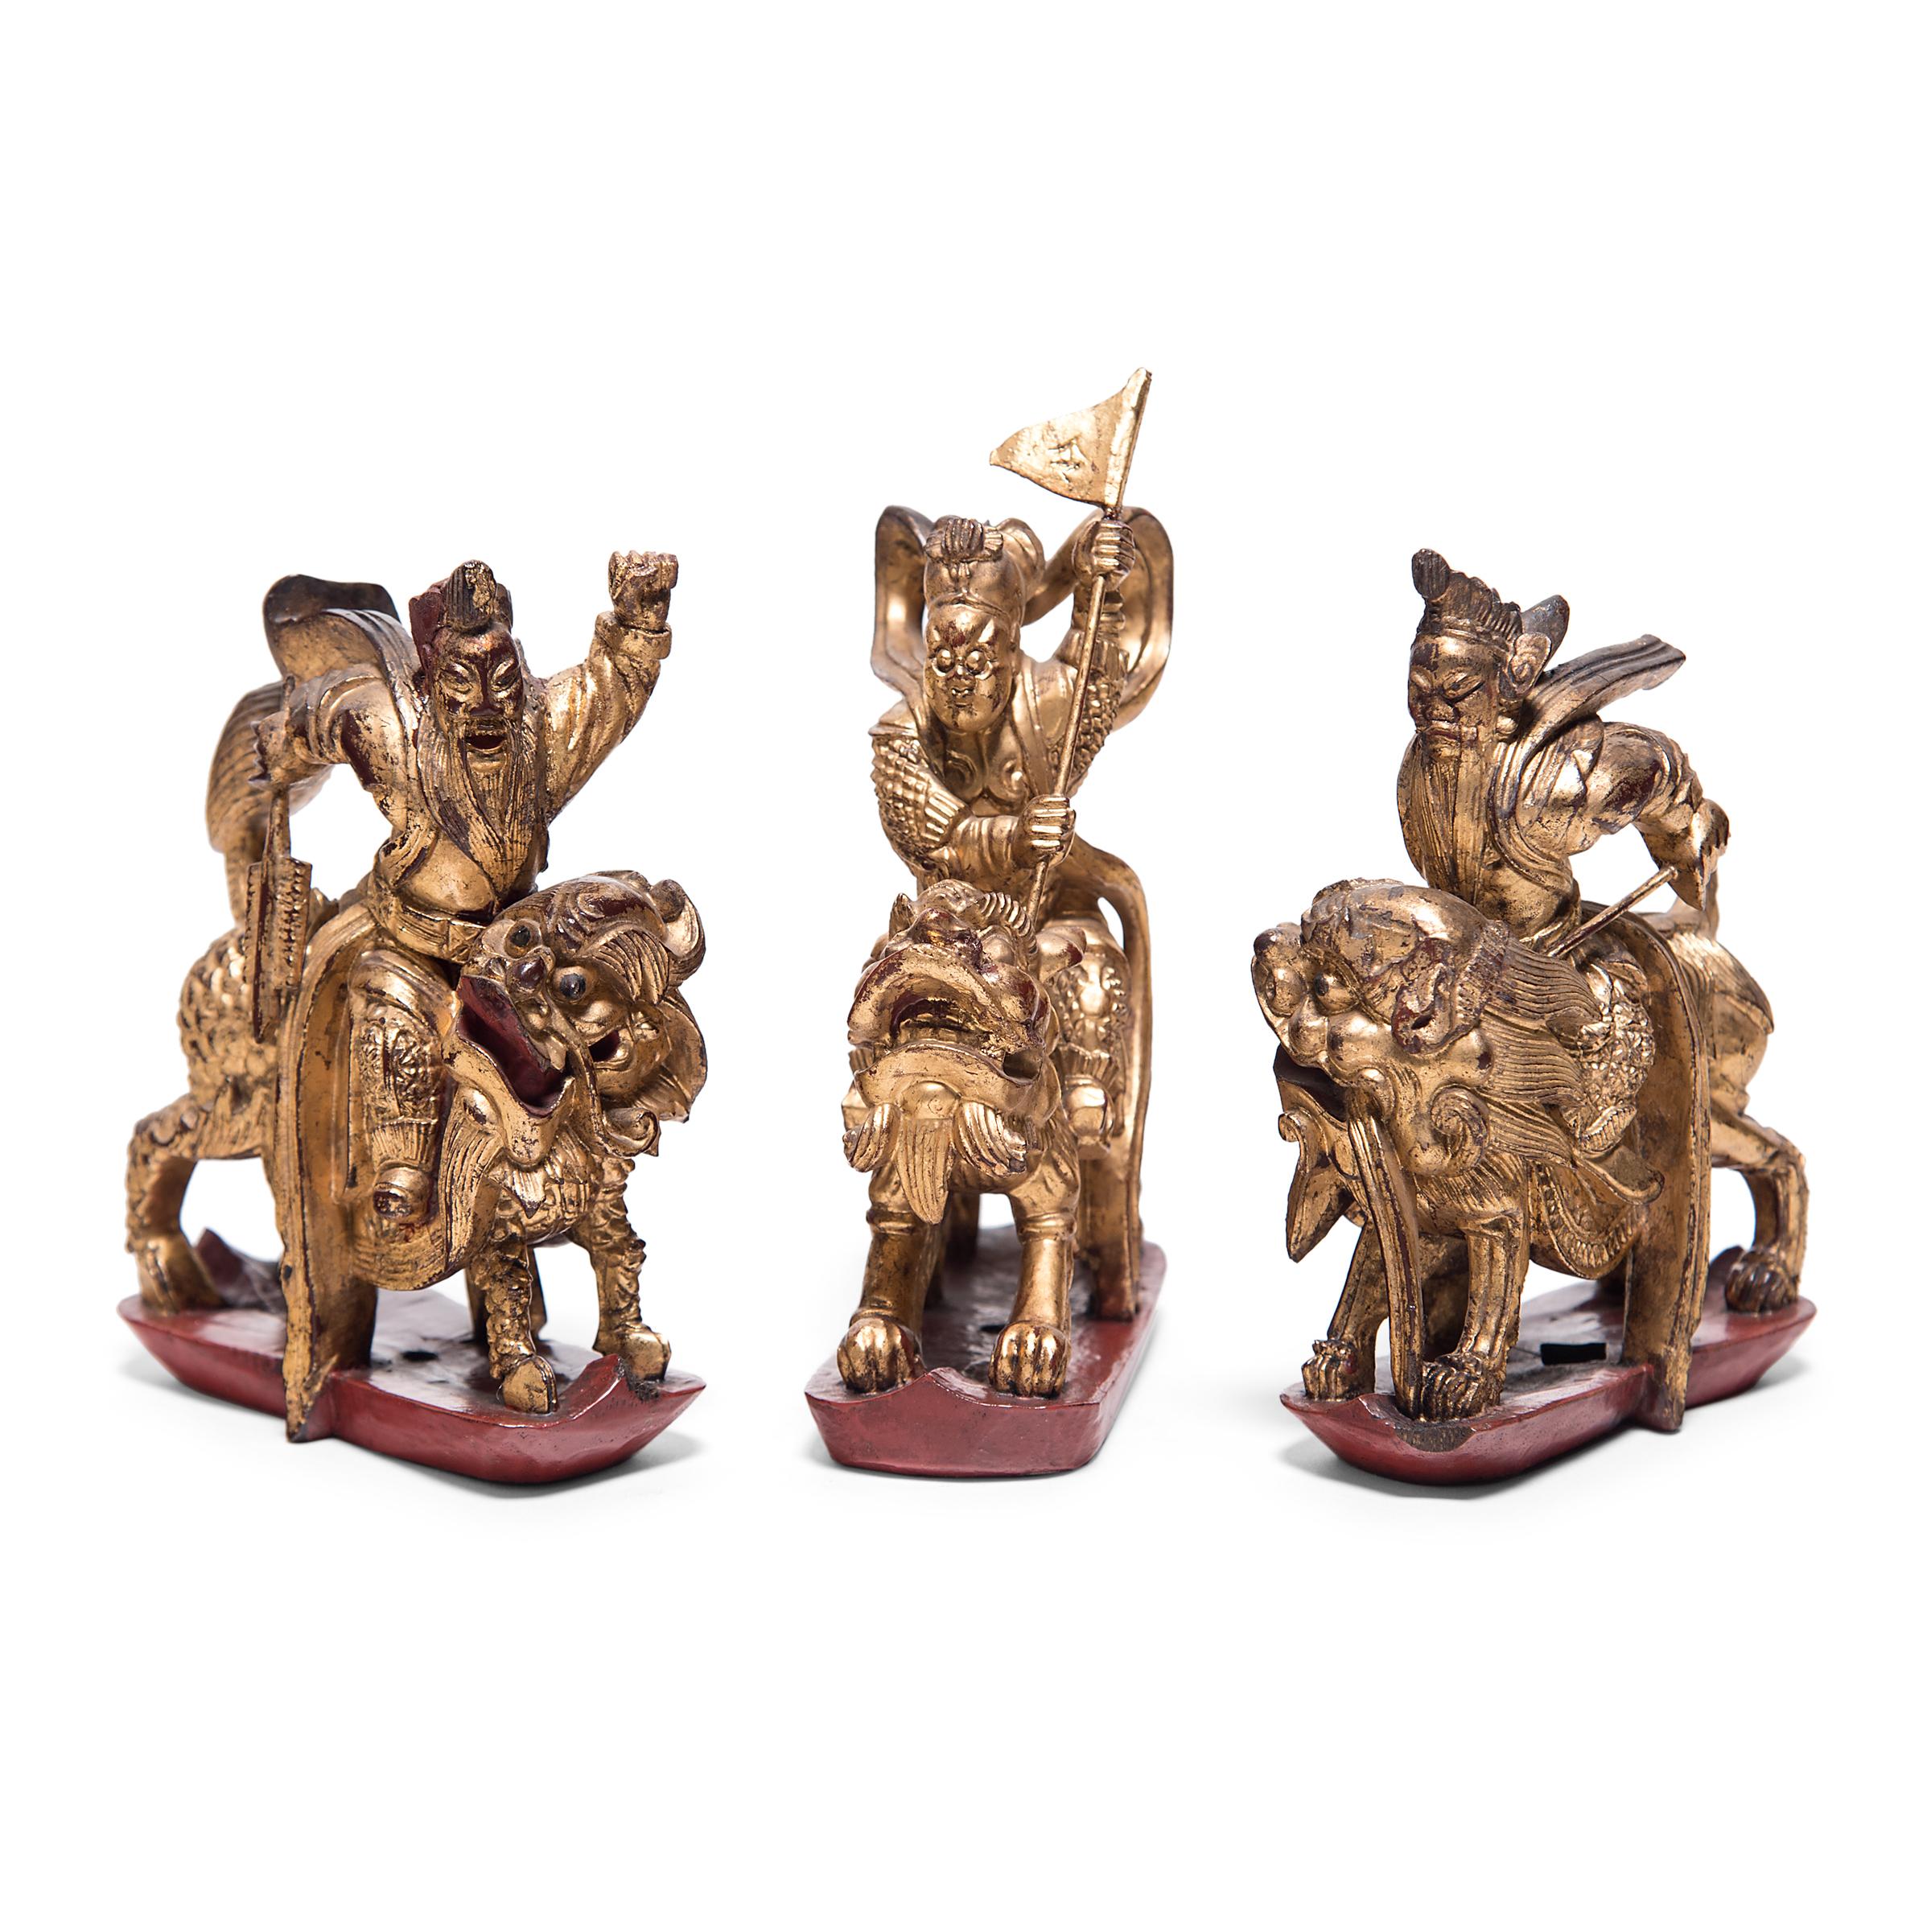 Lacquered Chinese Mythical Gilt Figure with Divine Steed, circa 1850